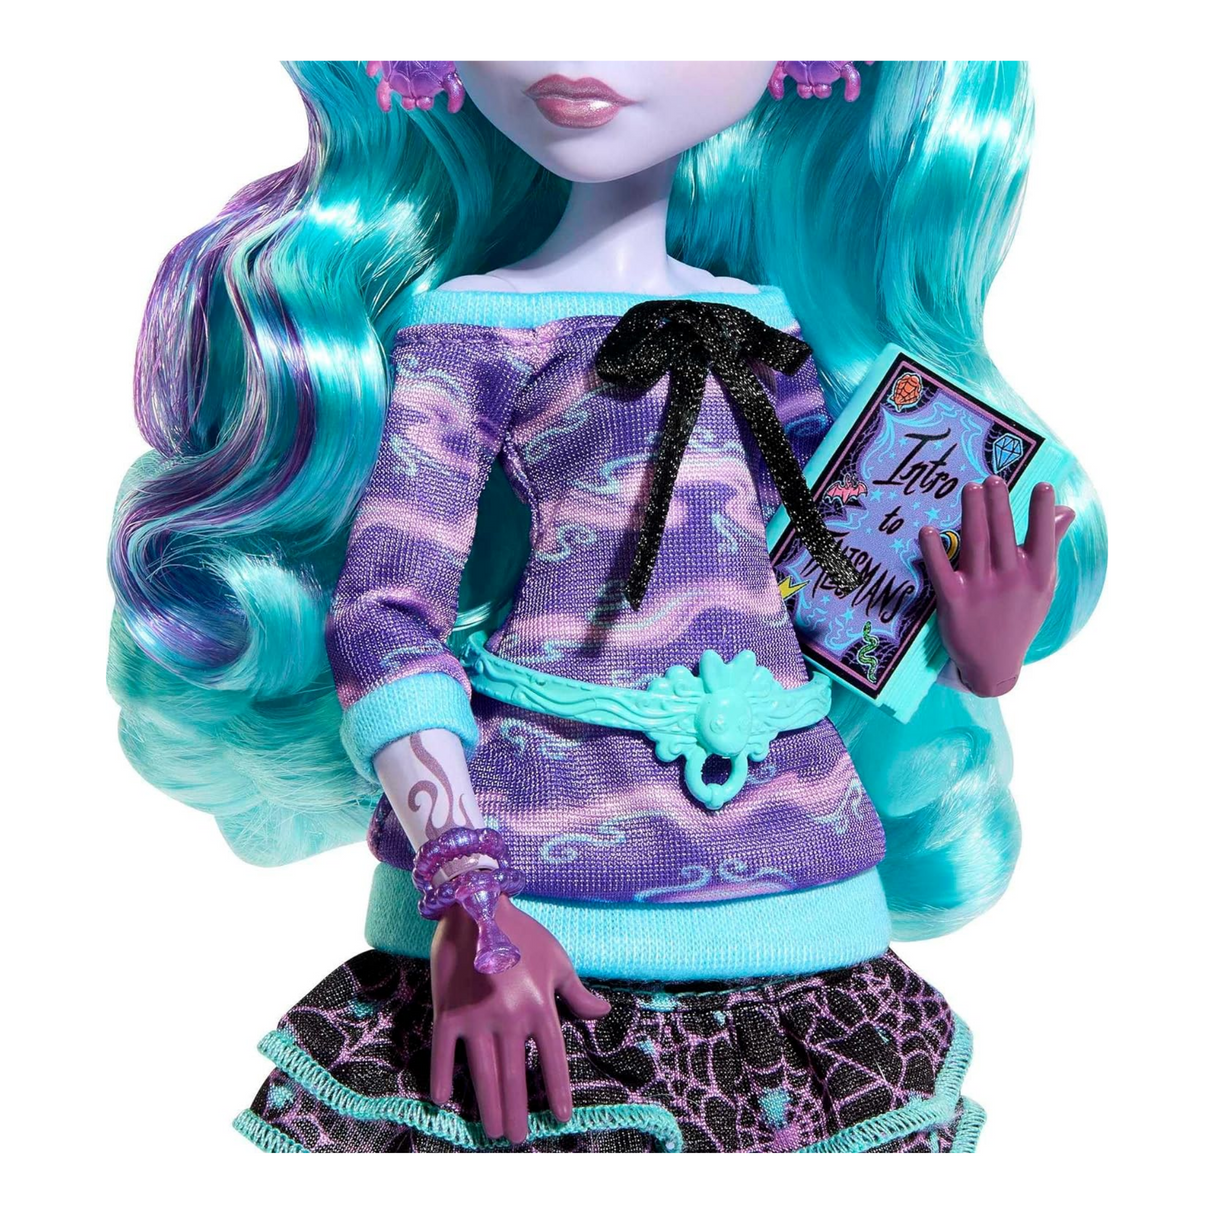 Monster High Doll And Sleepover Accessories - Twyla